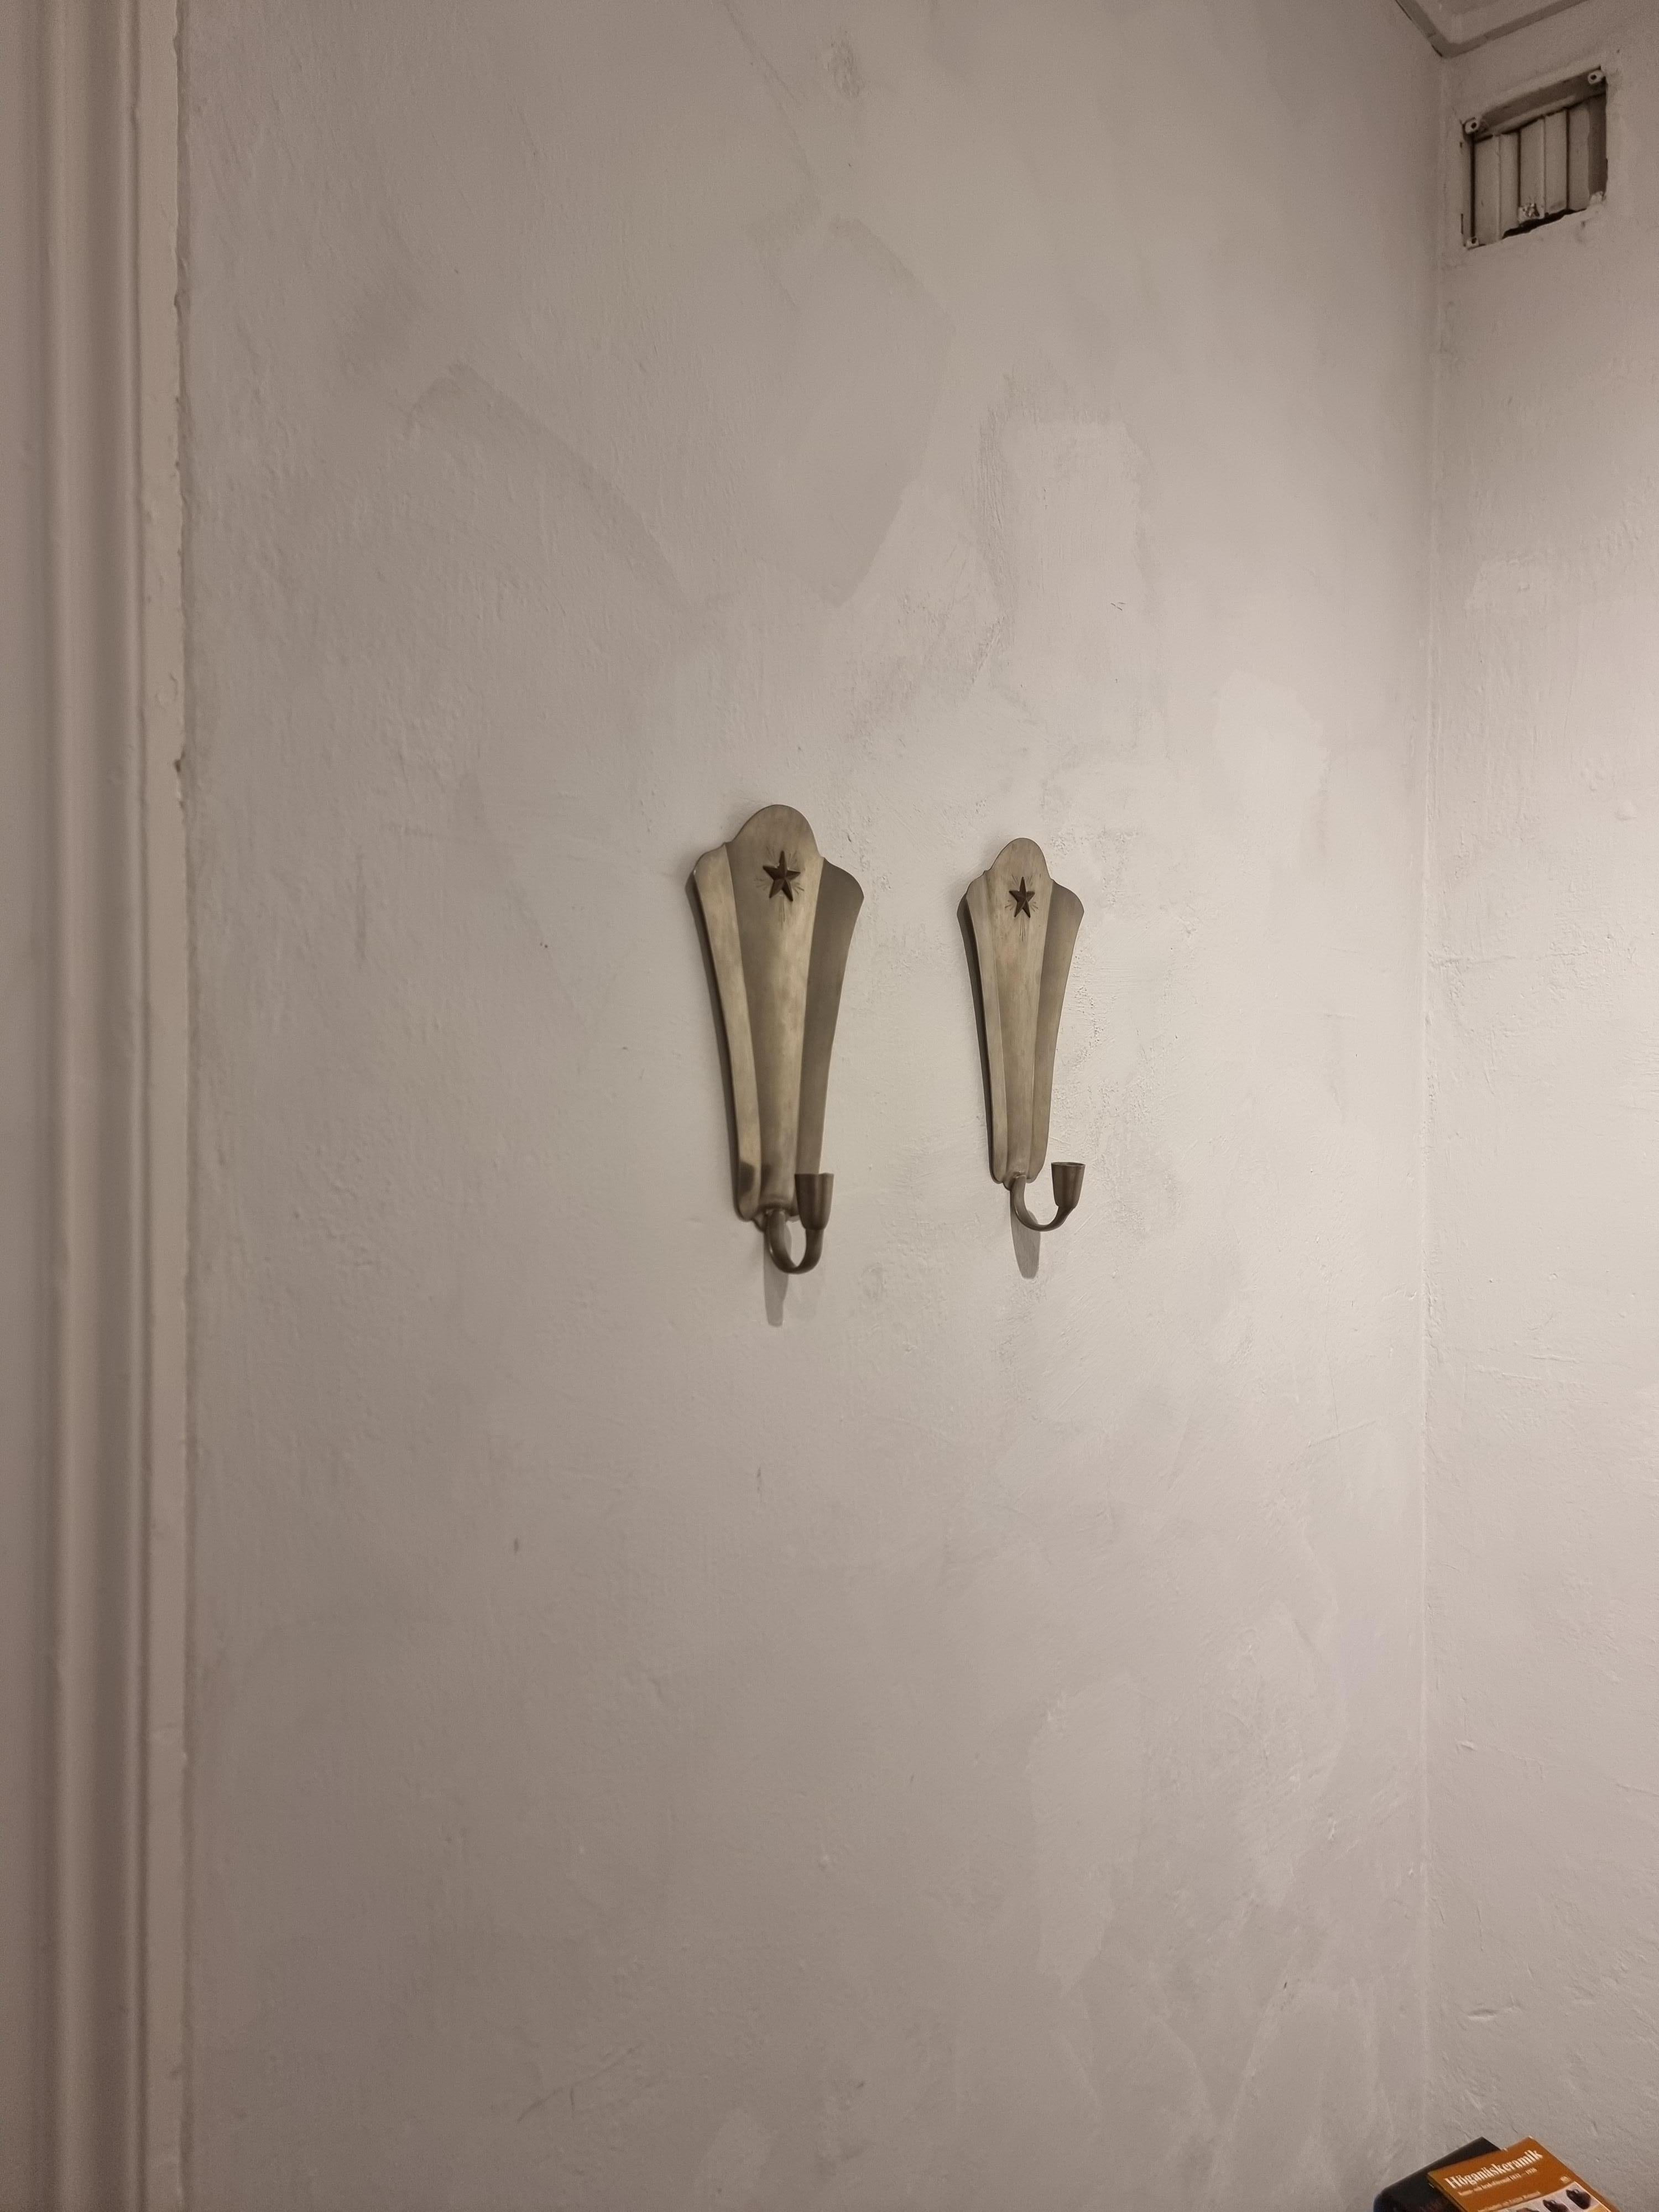 A pair of GAB/Guldaktiebolaget wall candle holders / sconces in pewter with star decor in brass.

Marked: GAB Tenn, O8/1940, Svensk bara. Stockholm hallmark.

In good condition, normal signs of age and wear.